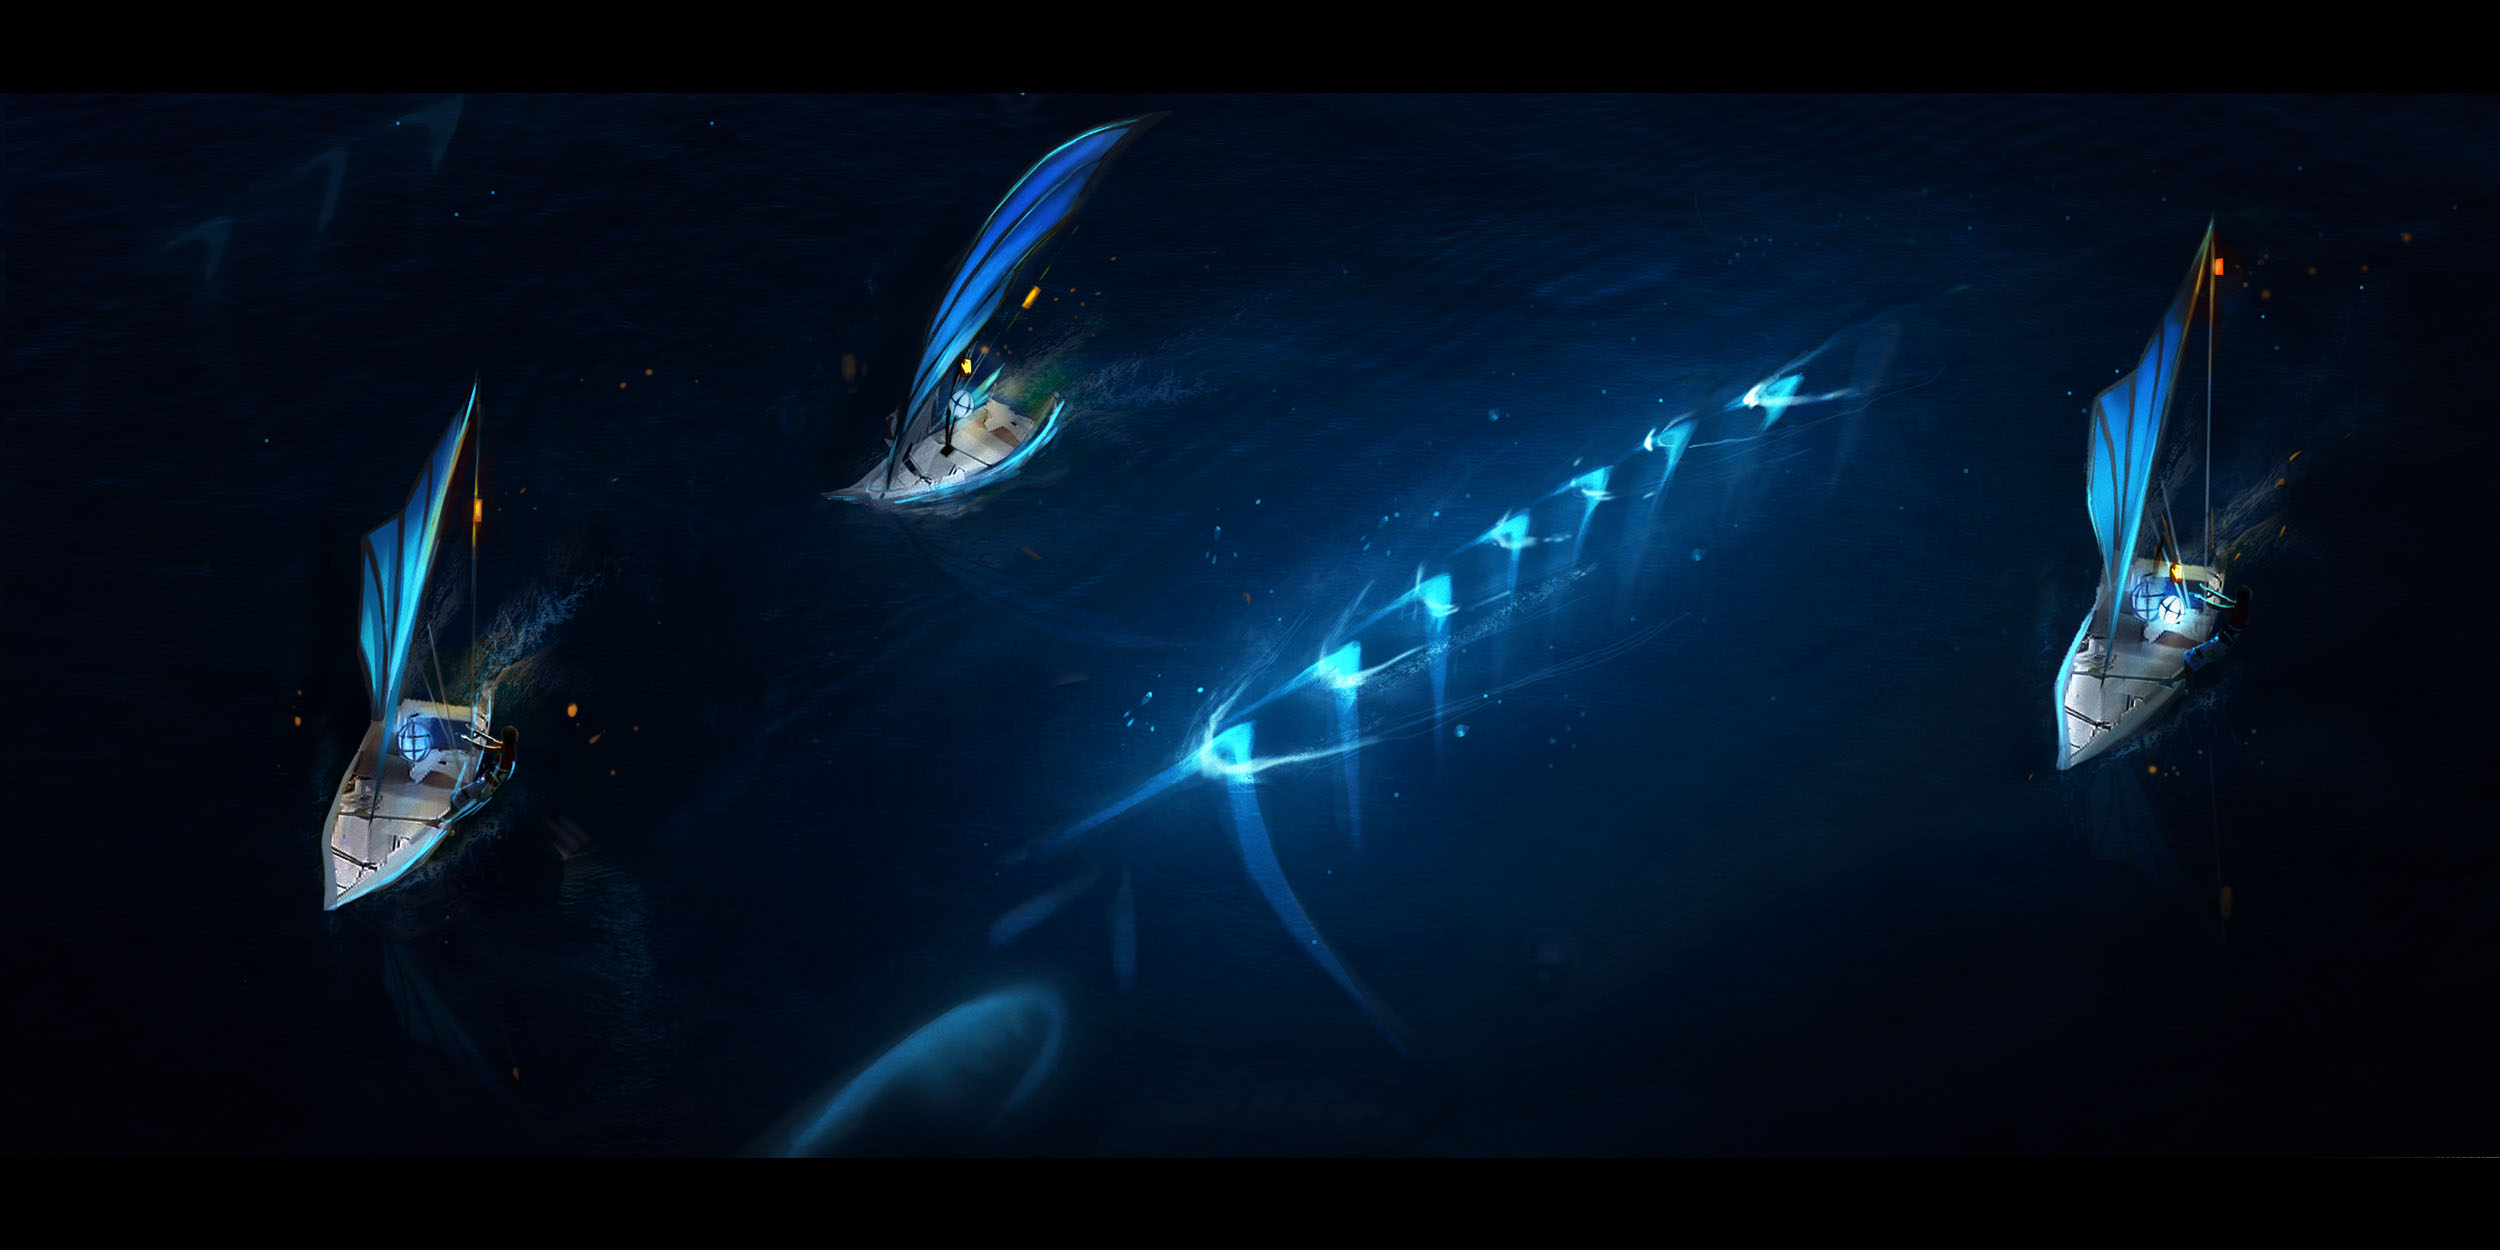 Concept Company where ships are greeted by large manawhales, making the surrounding water glow.